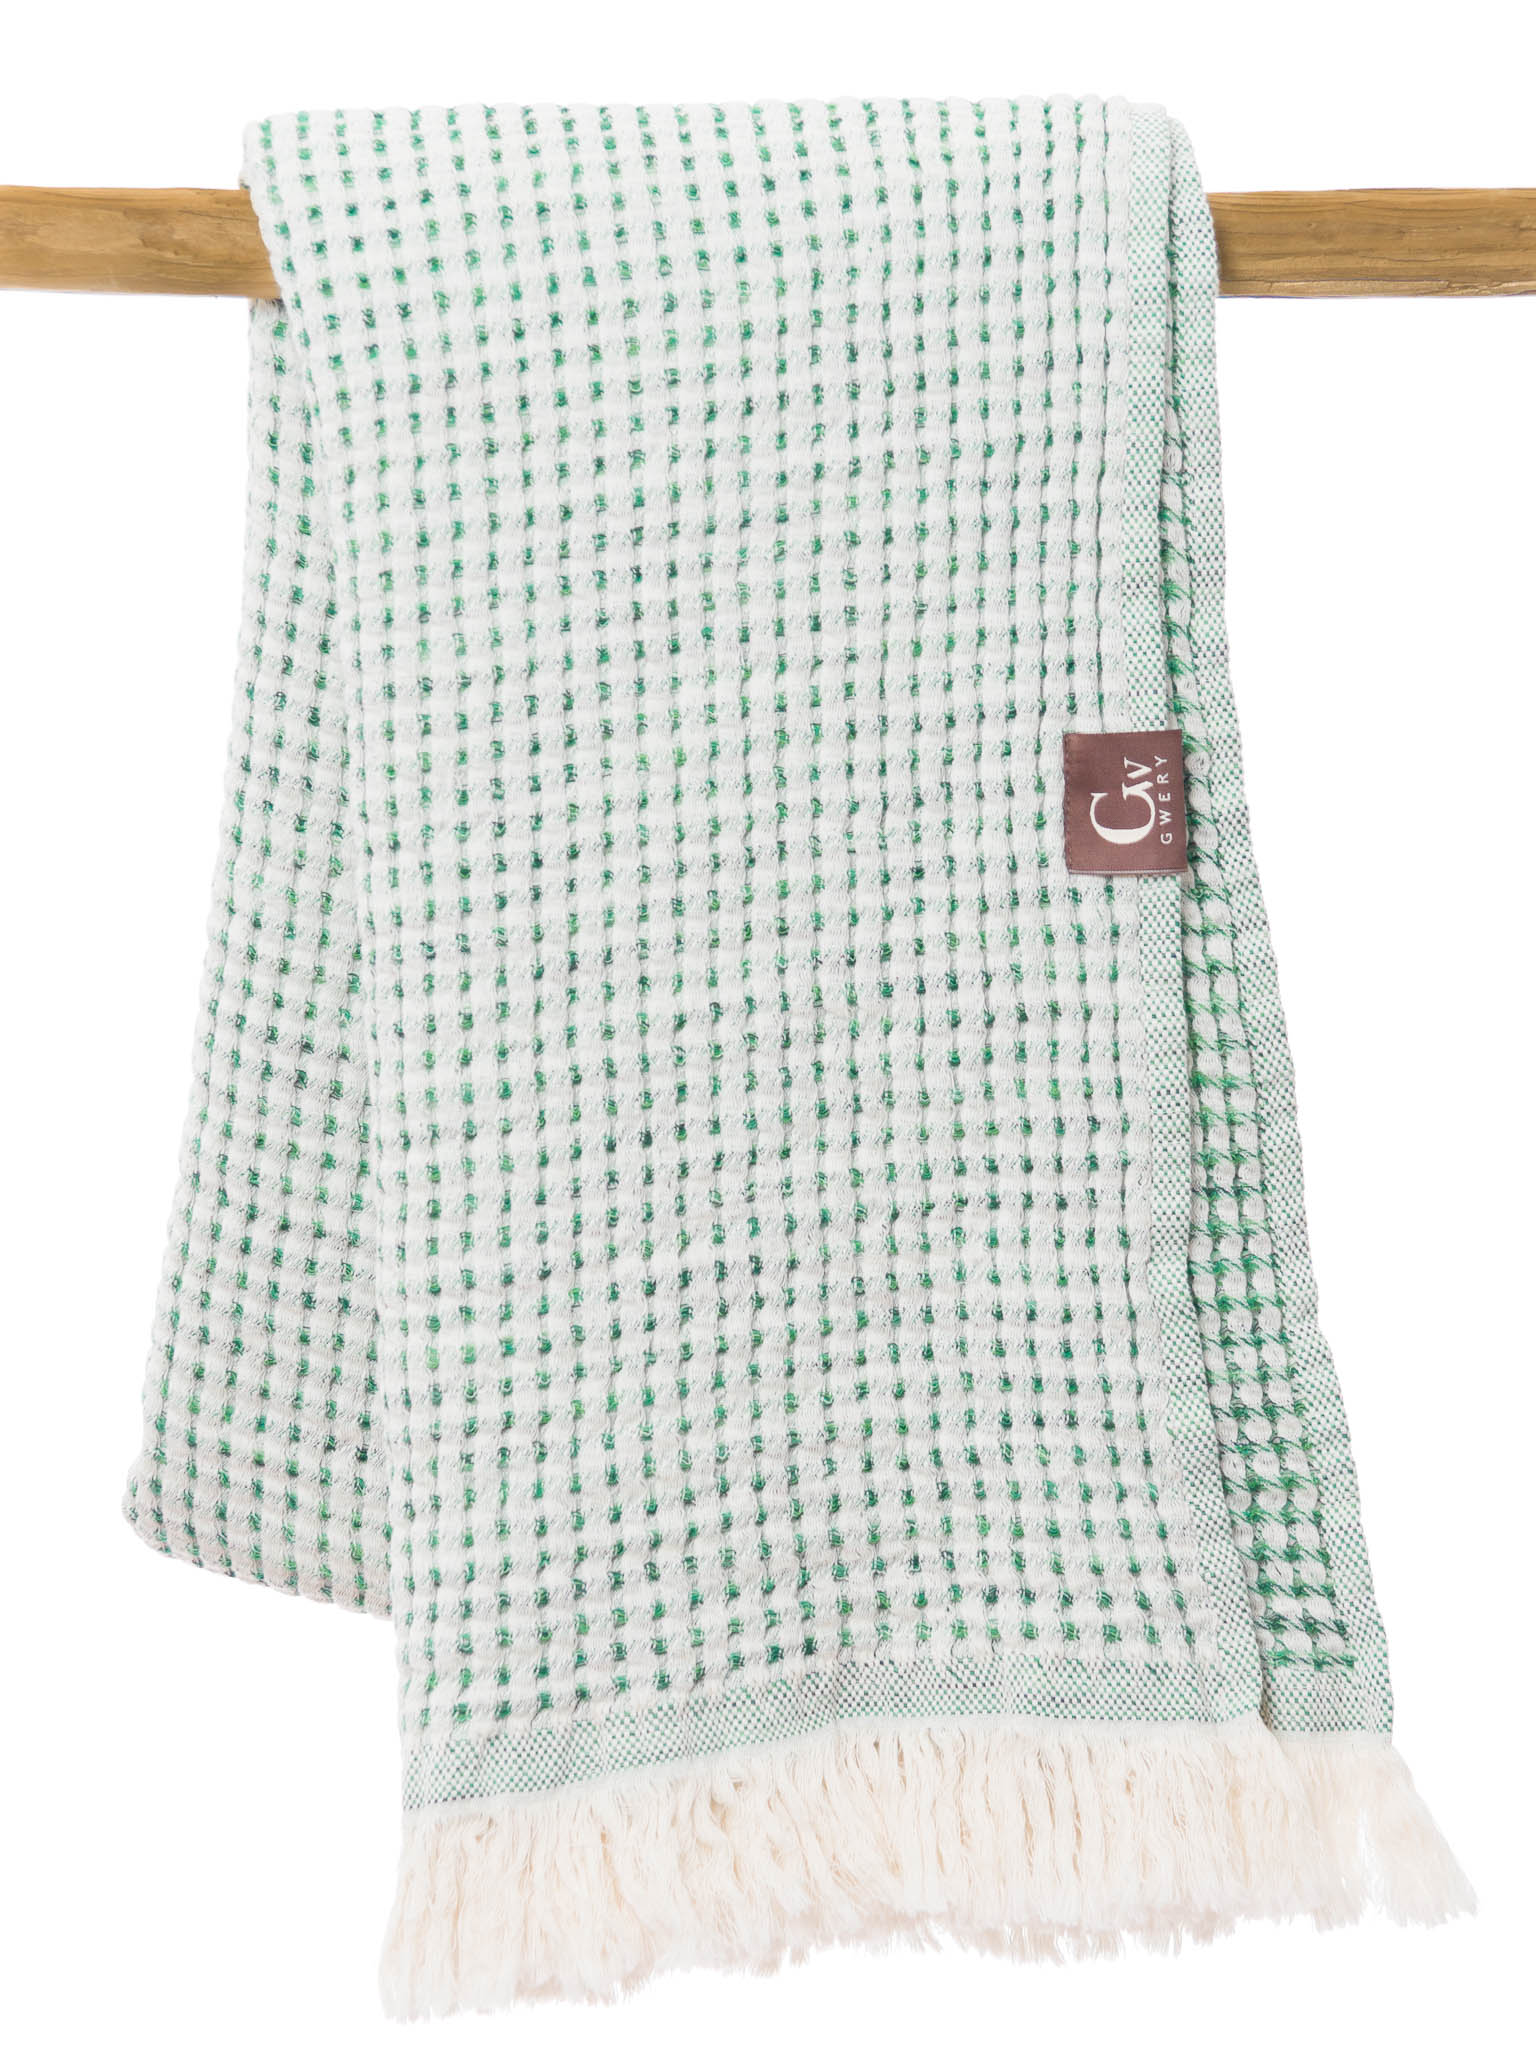 Green patterned double sided, honeycomb beach towel folded